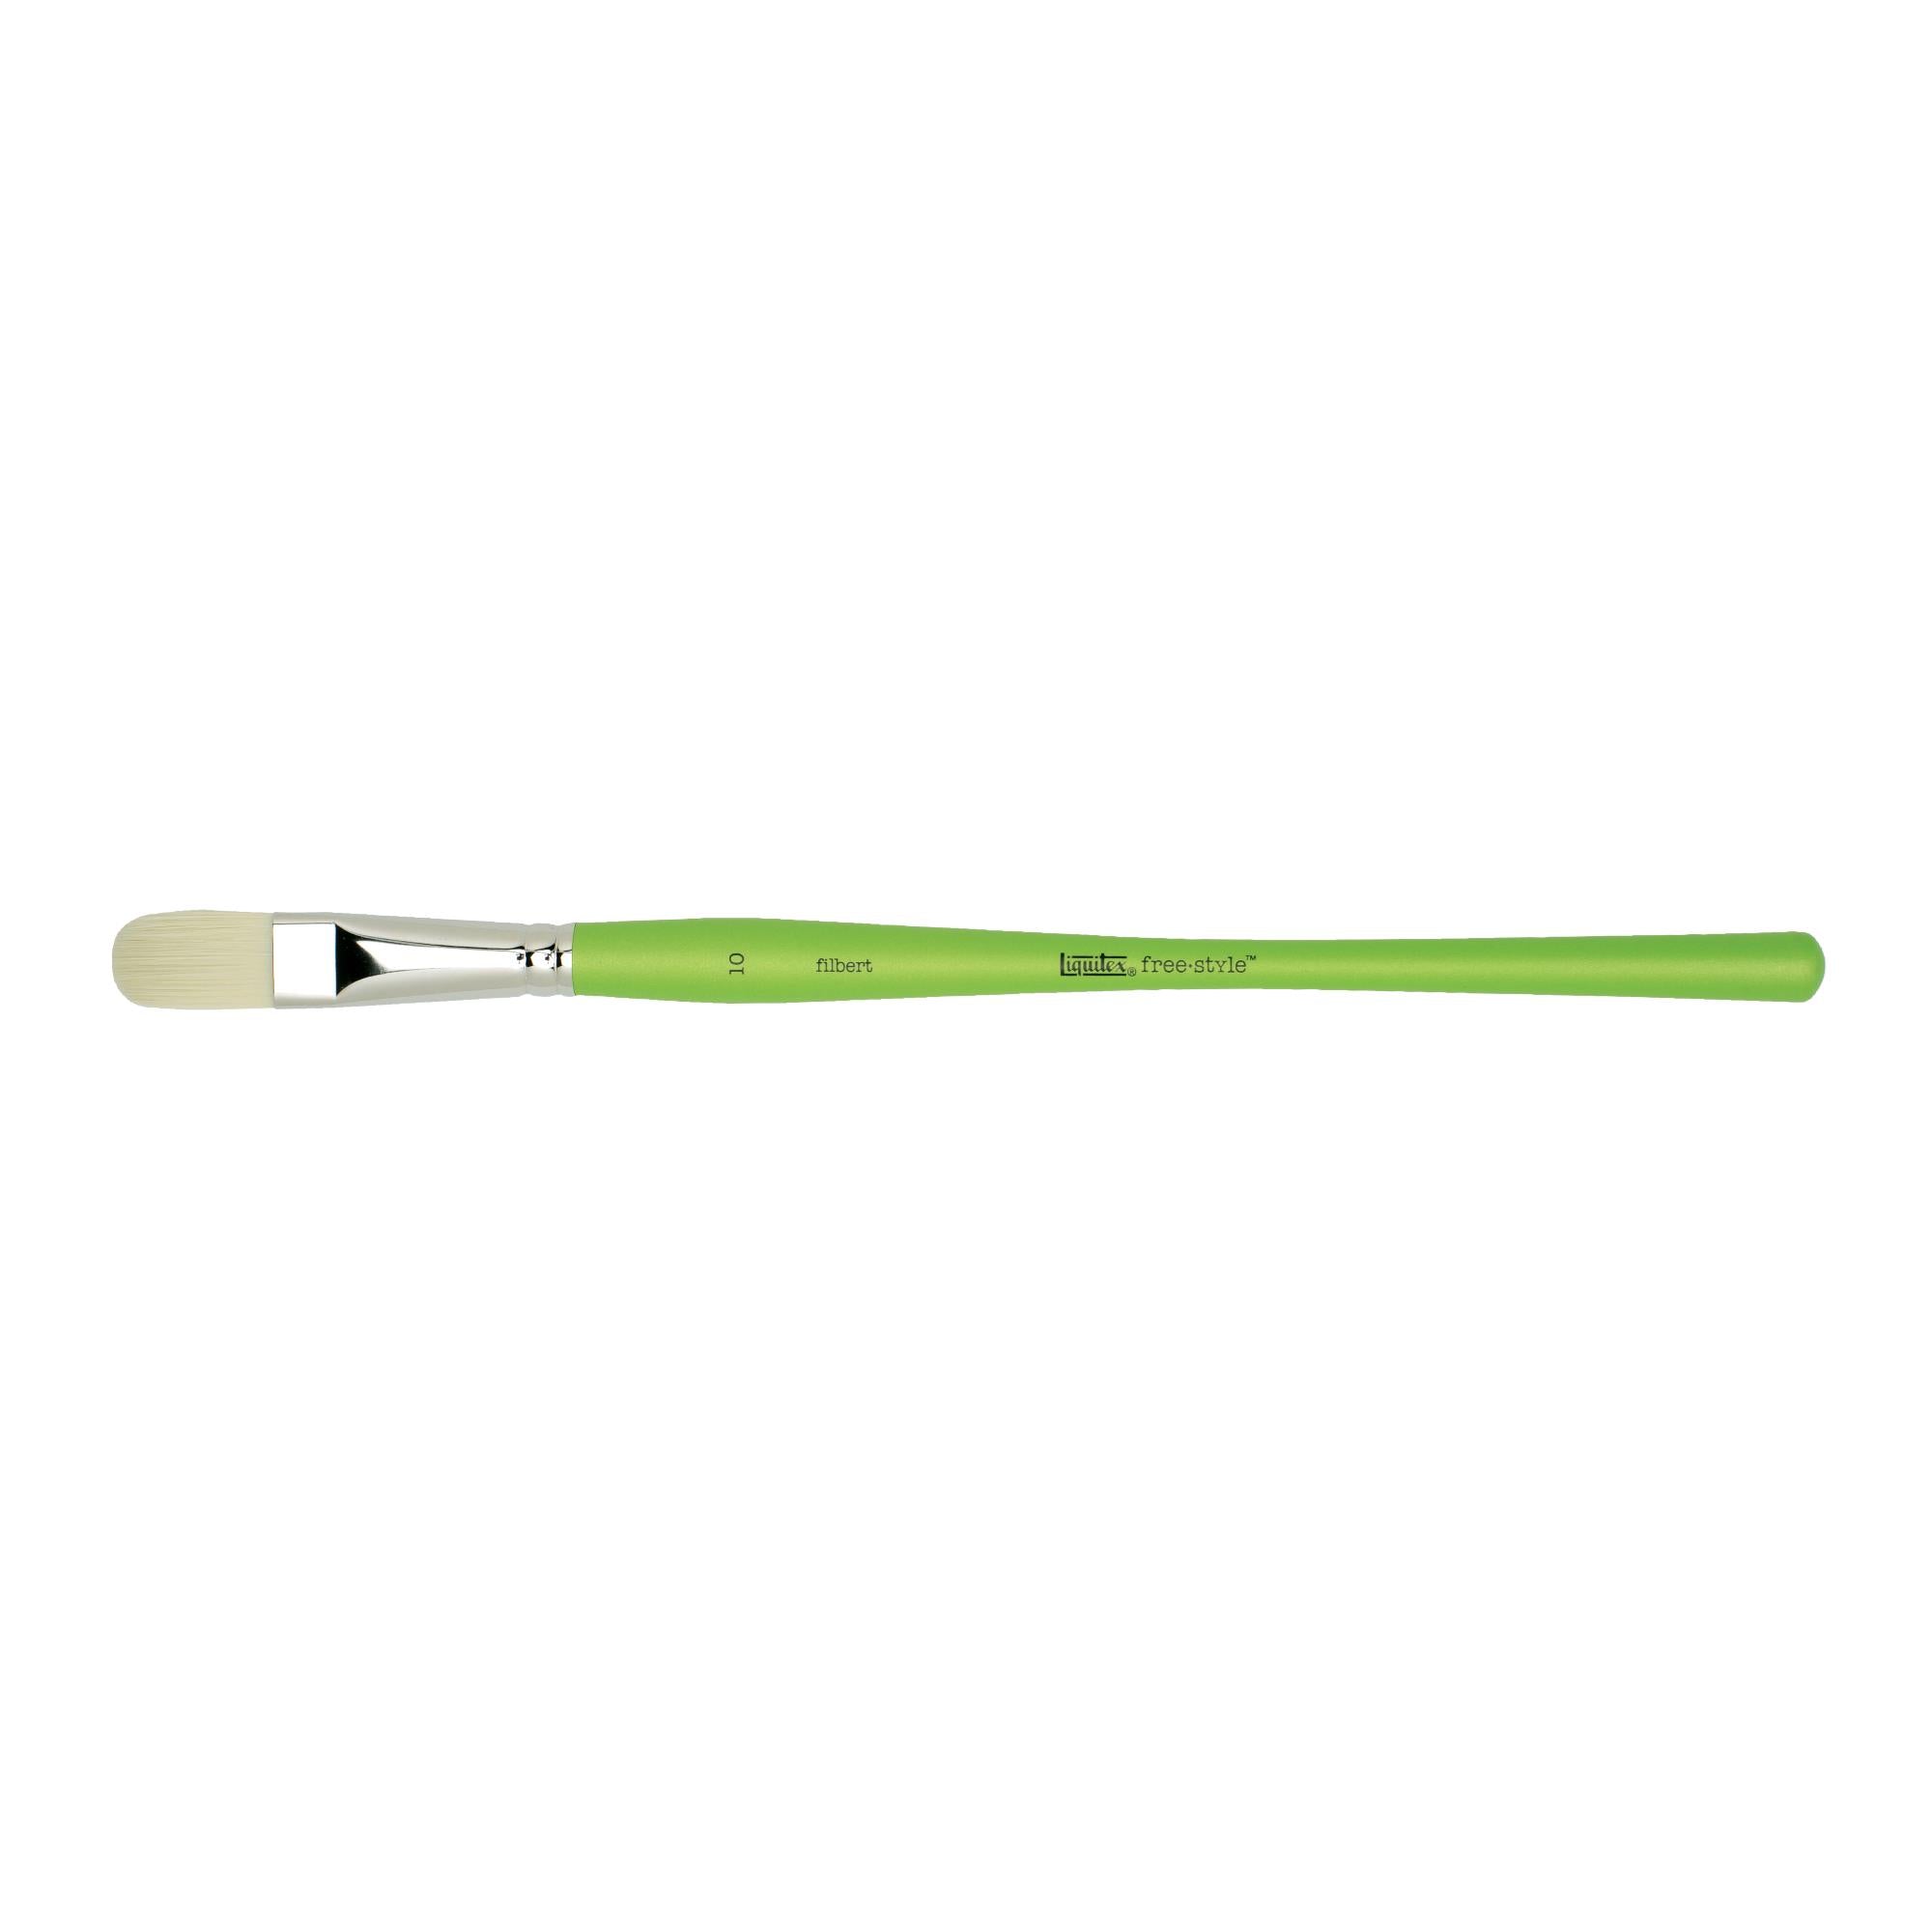 Liquitex Freestyle Large Scale Brush, Paddle 3-Inch : : Home